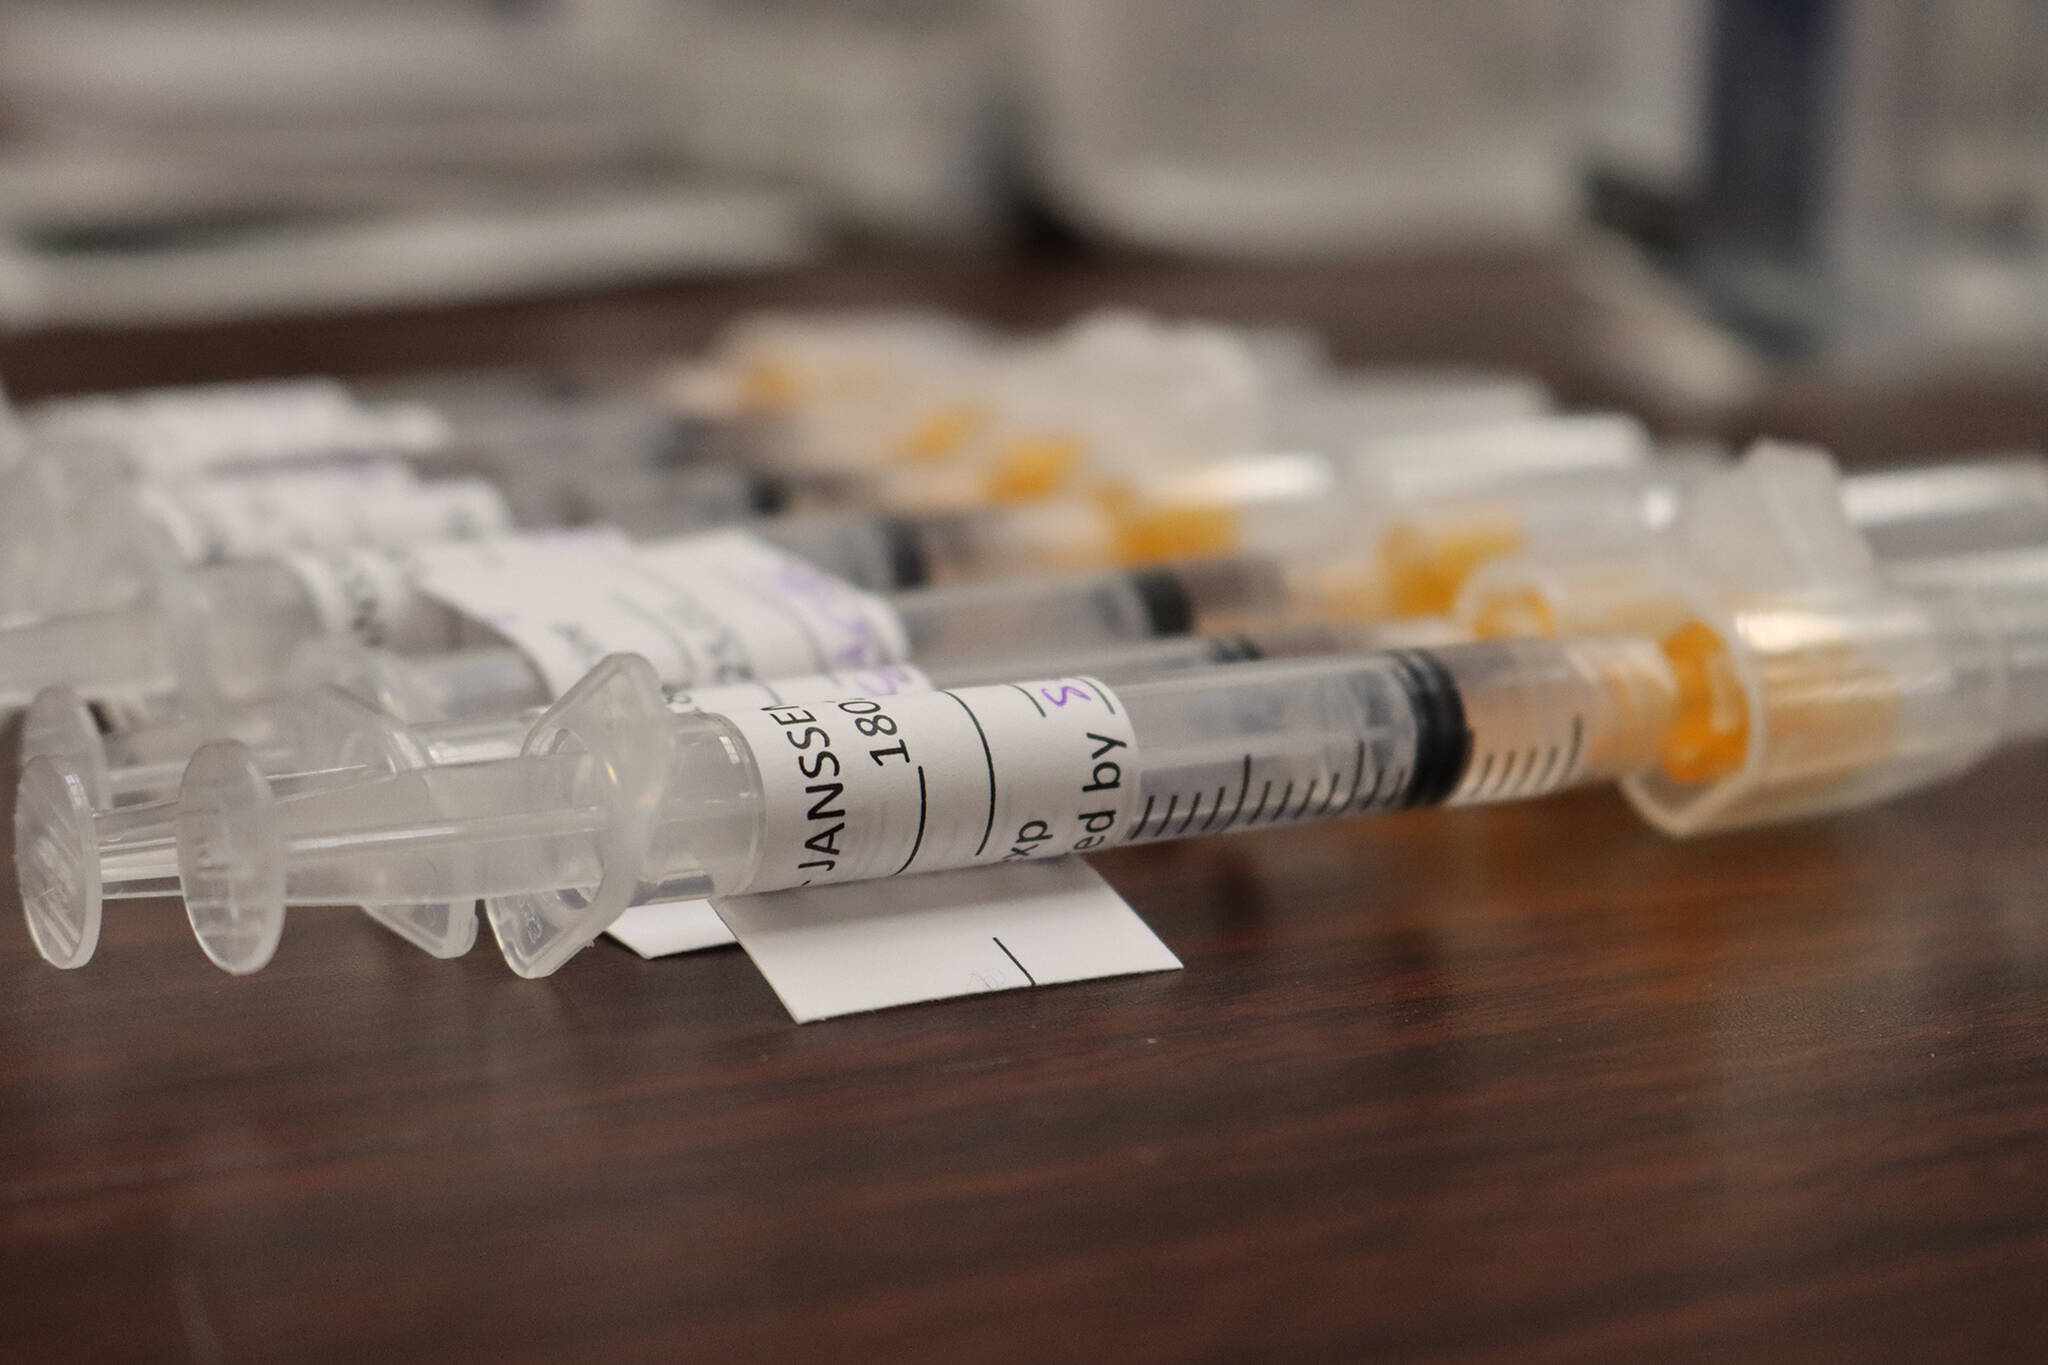 State health officials announced record numbers of COVID-19 cases and deaths Friday, but said the high numbers were the result of a data reporting backlog and needed context. Despite the anamolies in the reporting, health officials emphasized COVID-19 was stressing the states health care systems and urgerd Alaskans to get vaccines, like these laid out during a mass-inoculation clinic in Juneau on Mar. 13, 2021. (Ben Hohenstatt / Juneau Empire file)